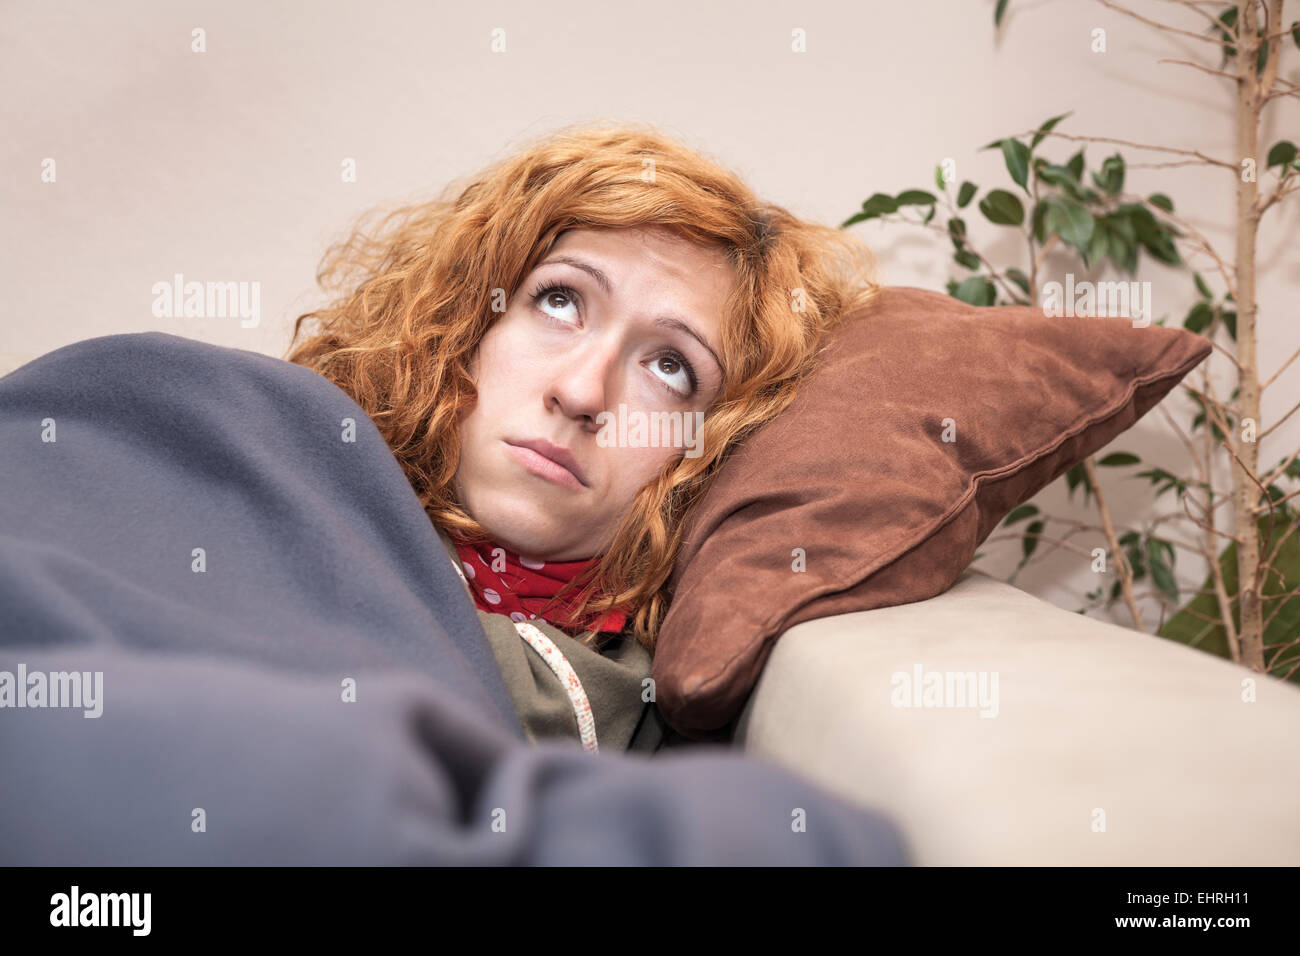 Sad lonely redhead woman looking up and resting on the sofa at home. Stock Photo